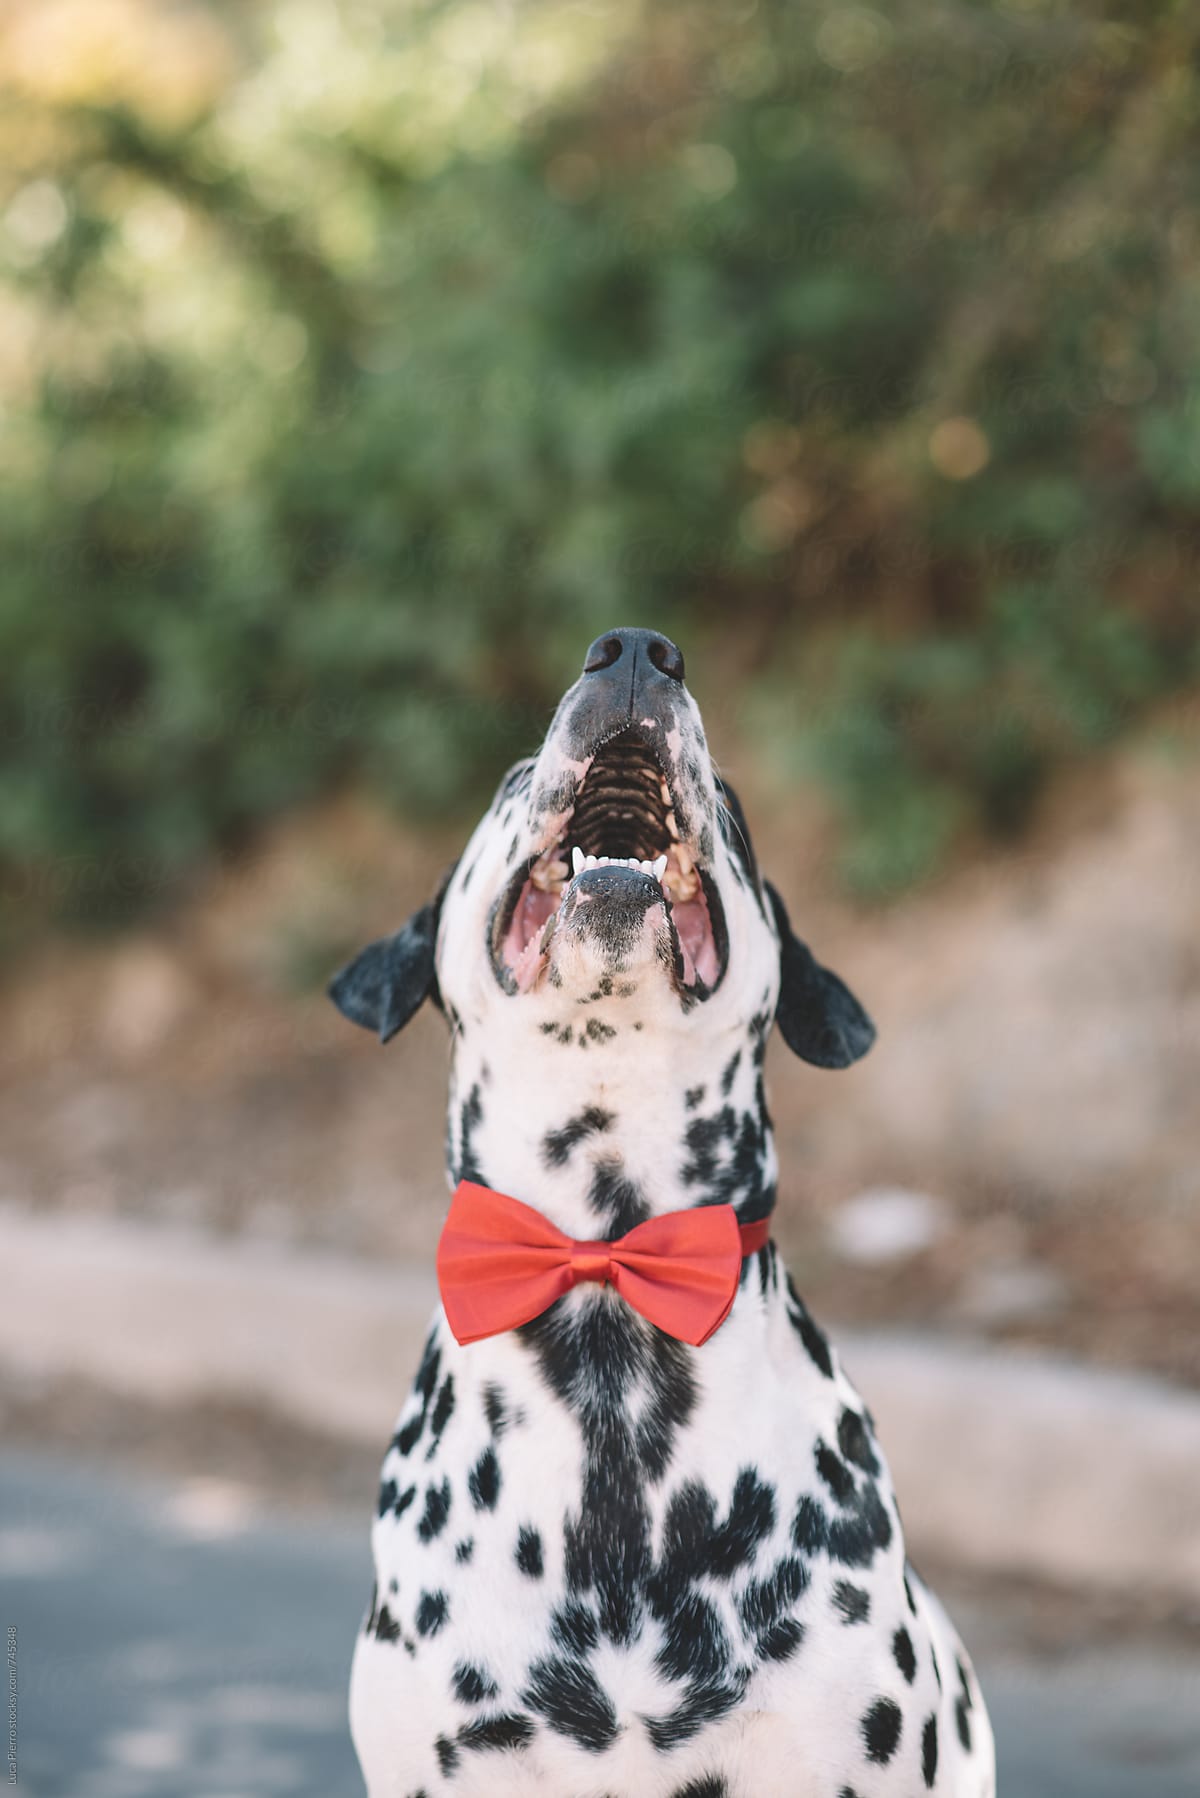 Dalmatian dog with a red bow looking up